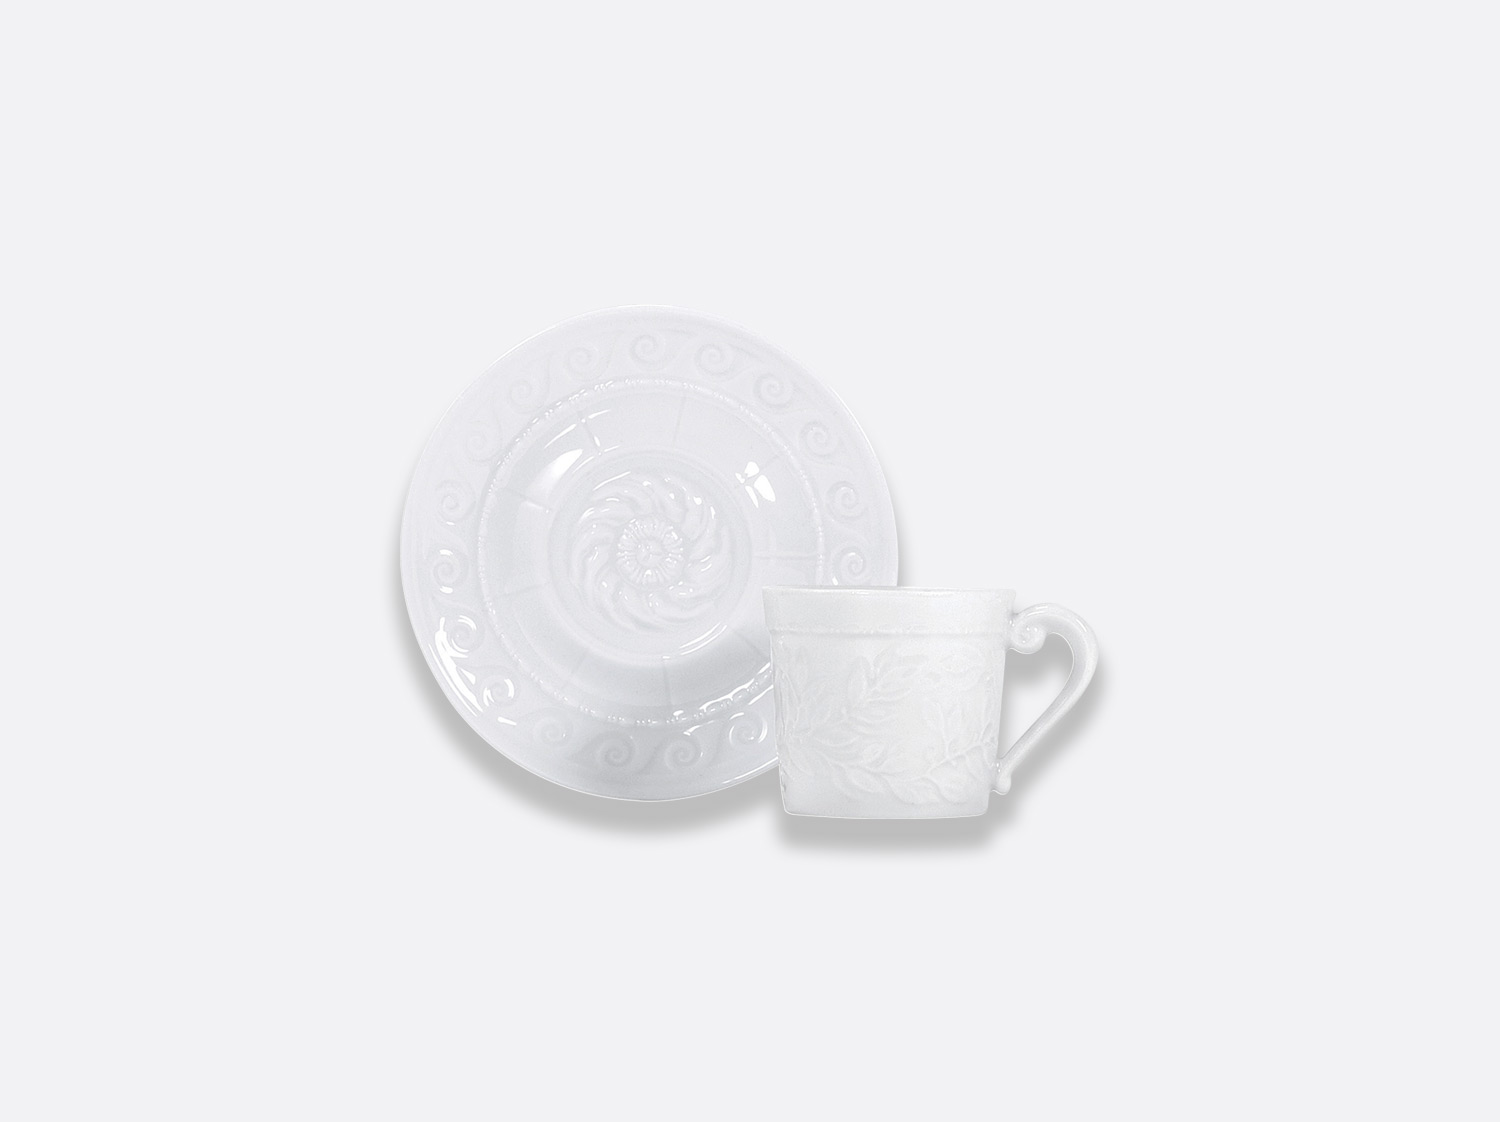 China Espresso cup and saucer 3.5 oz of the collection Louvre | Bernardaud